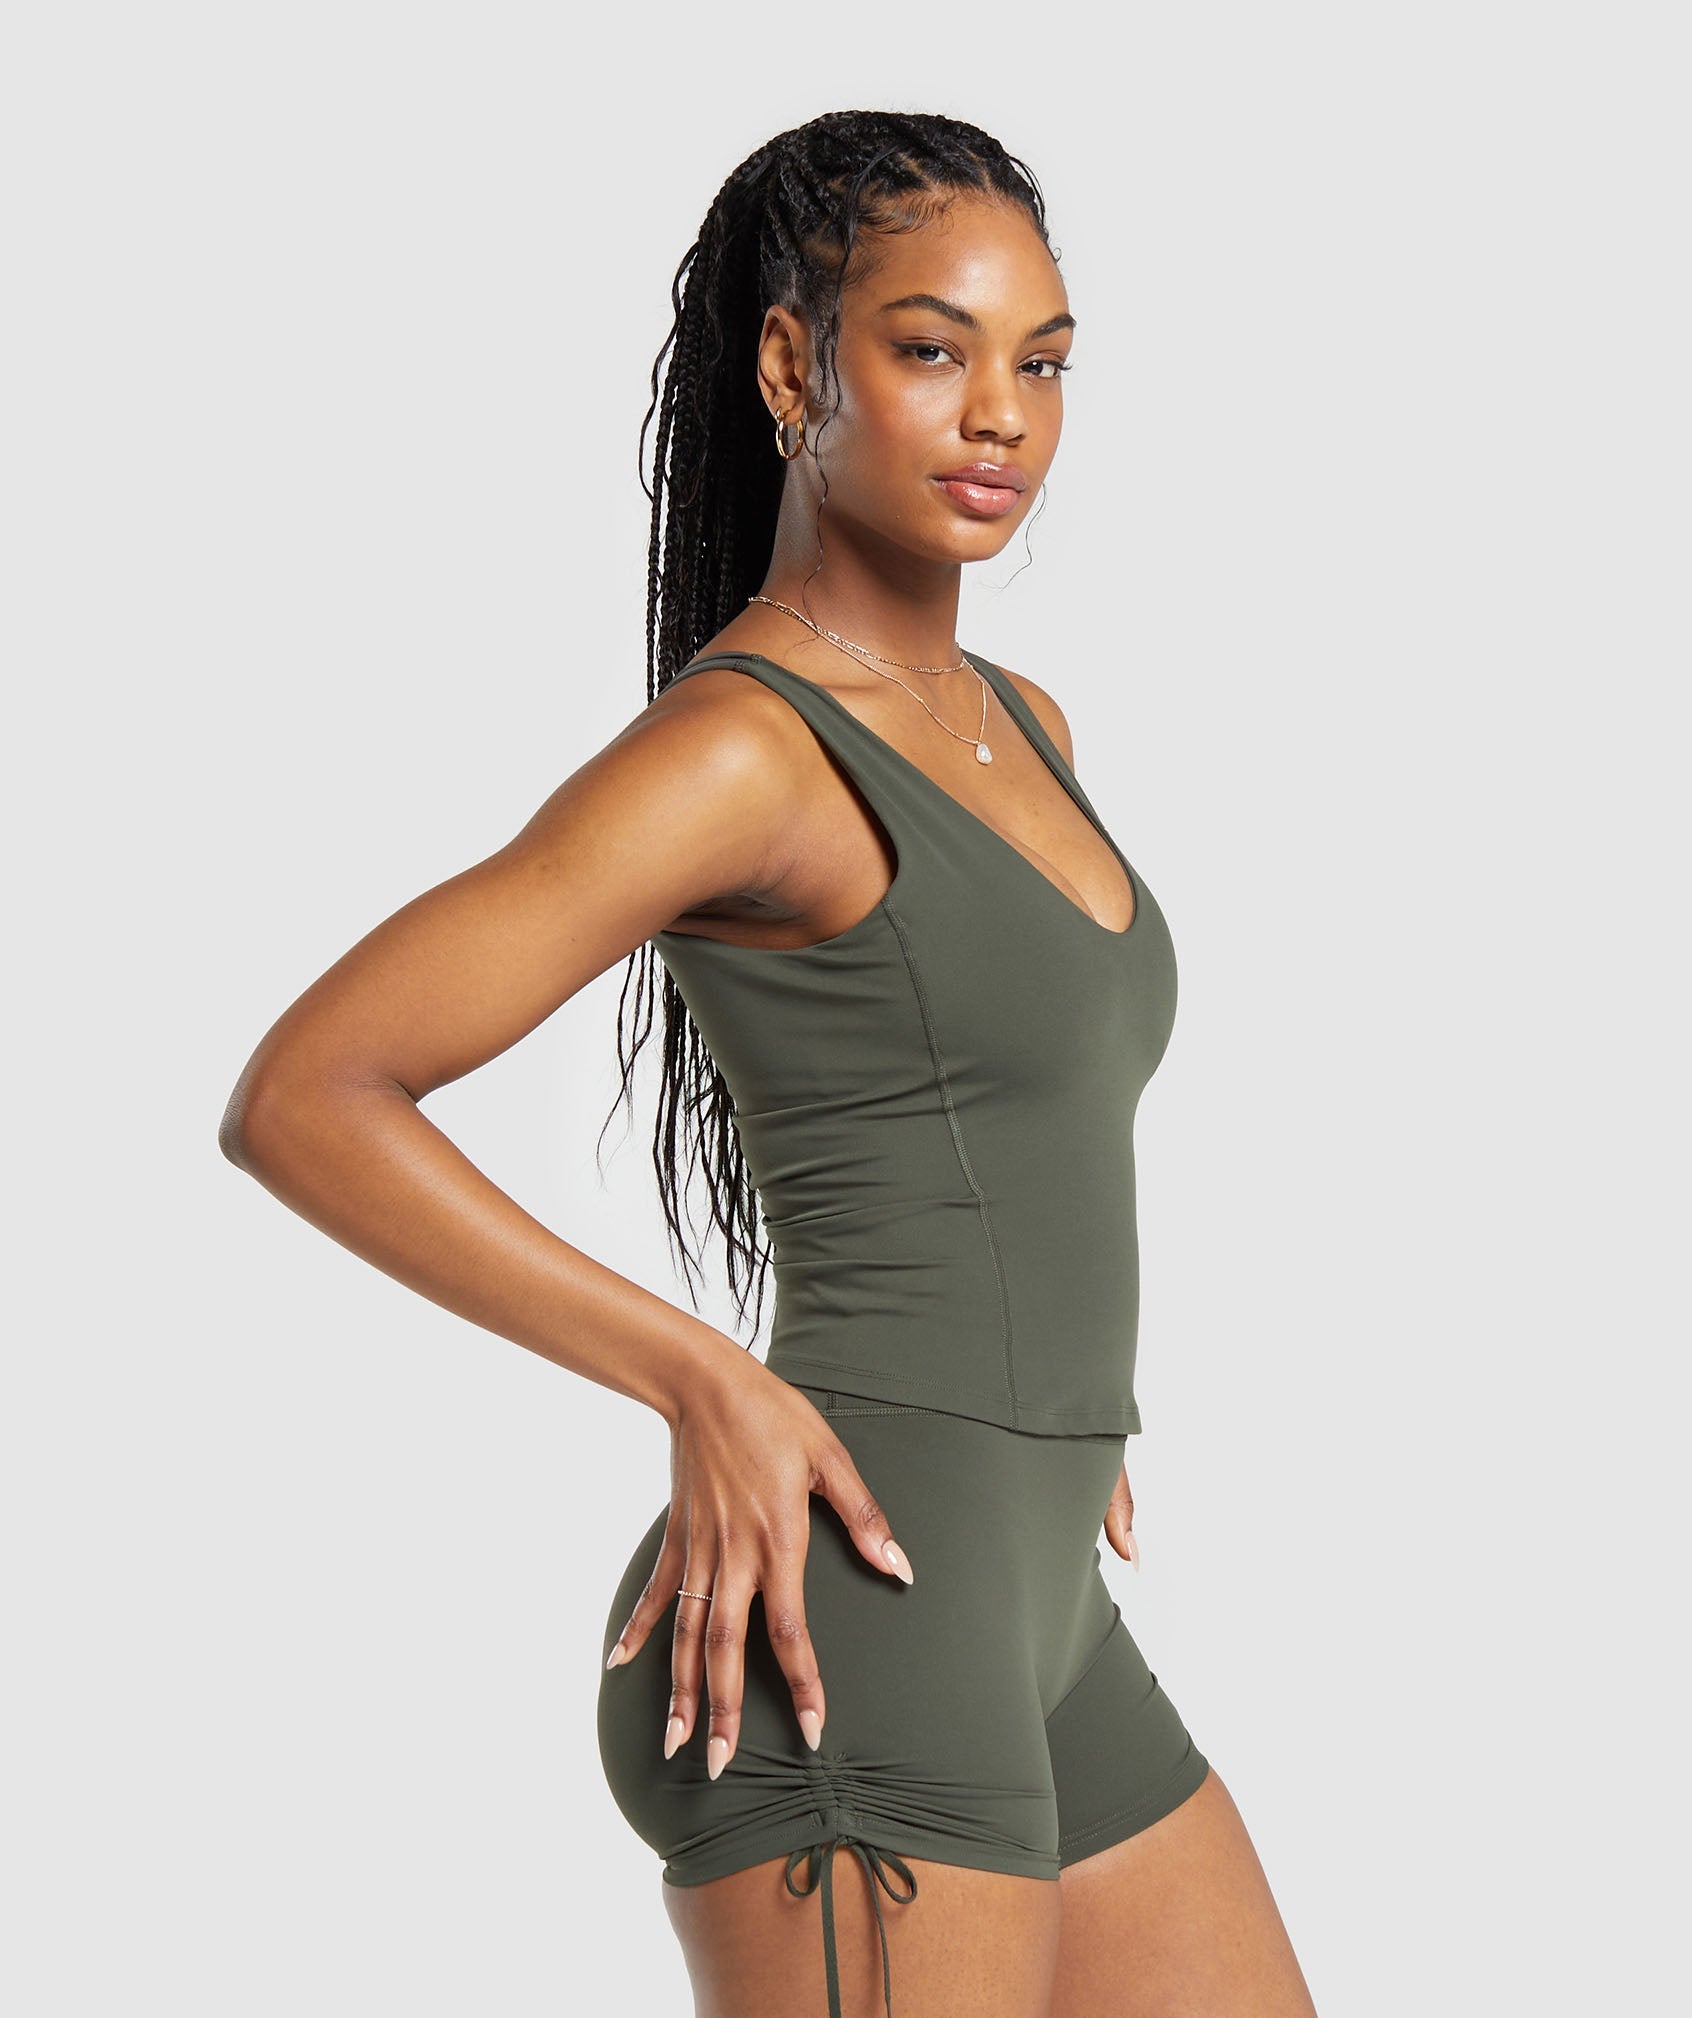 Ruche Tank in Strength Green - view 3